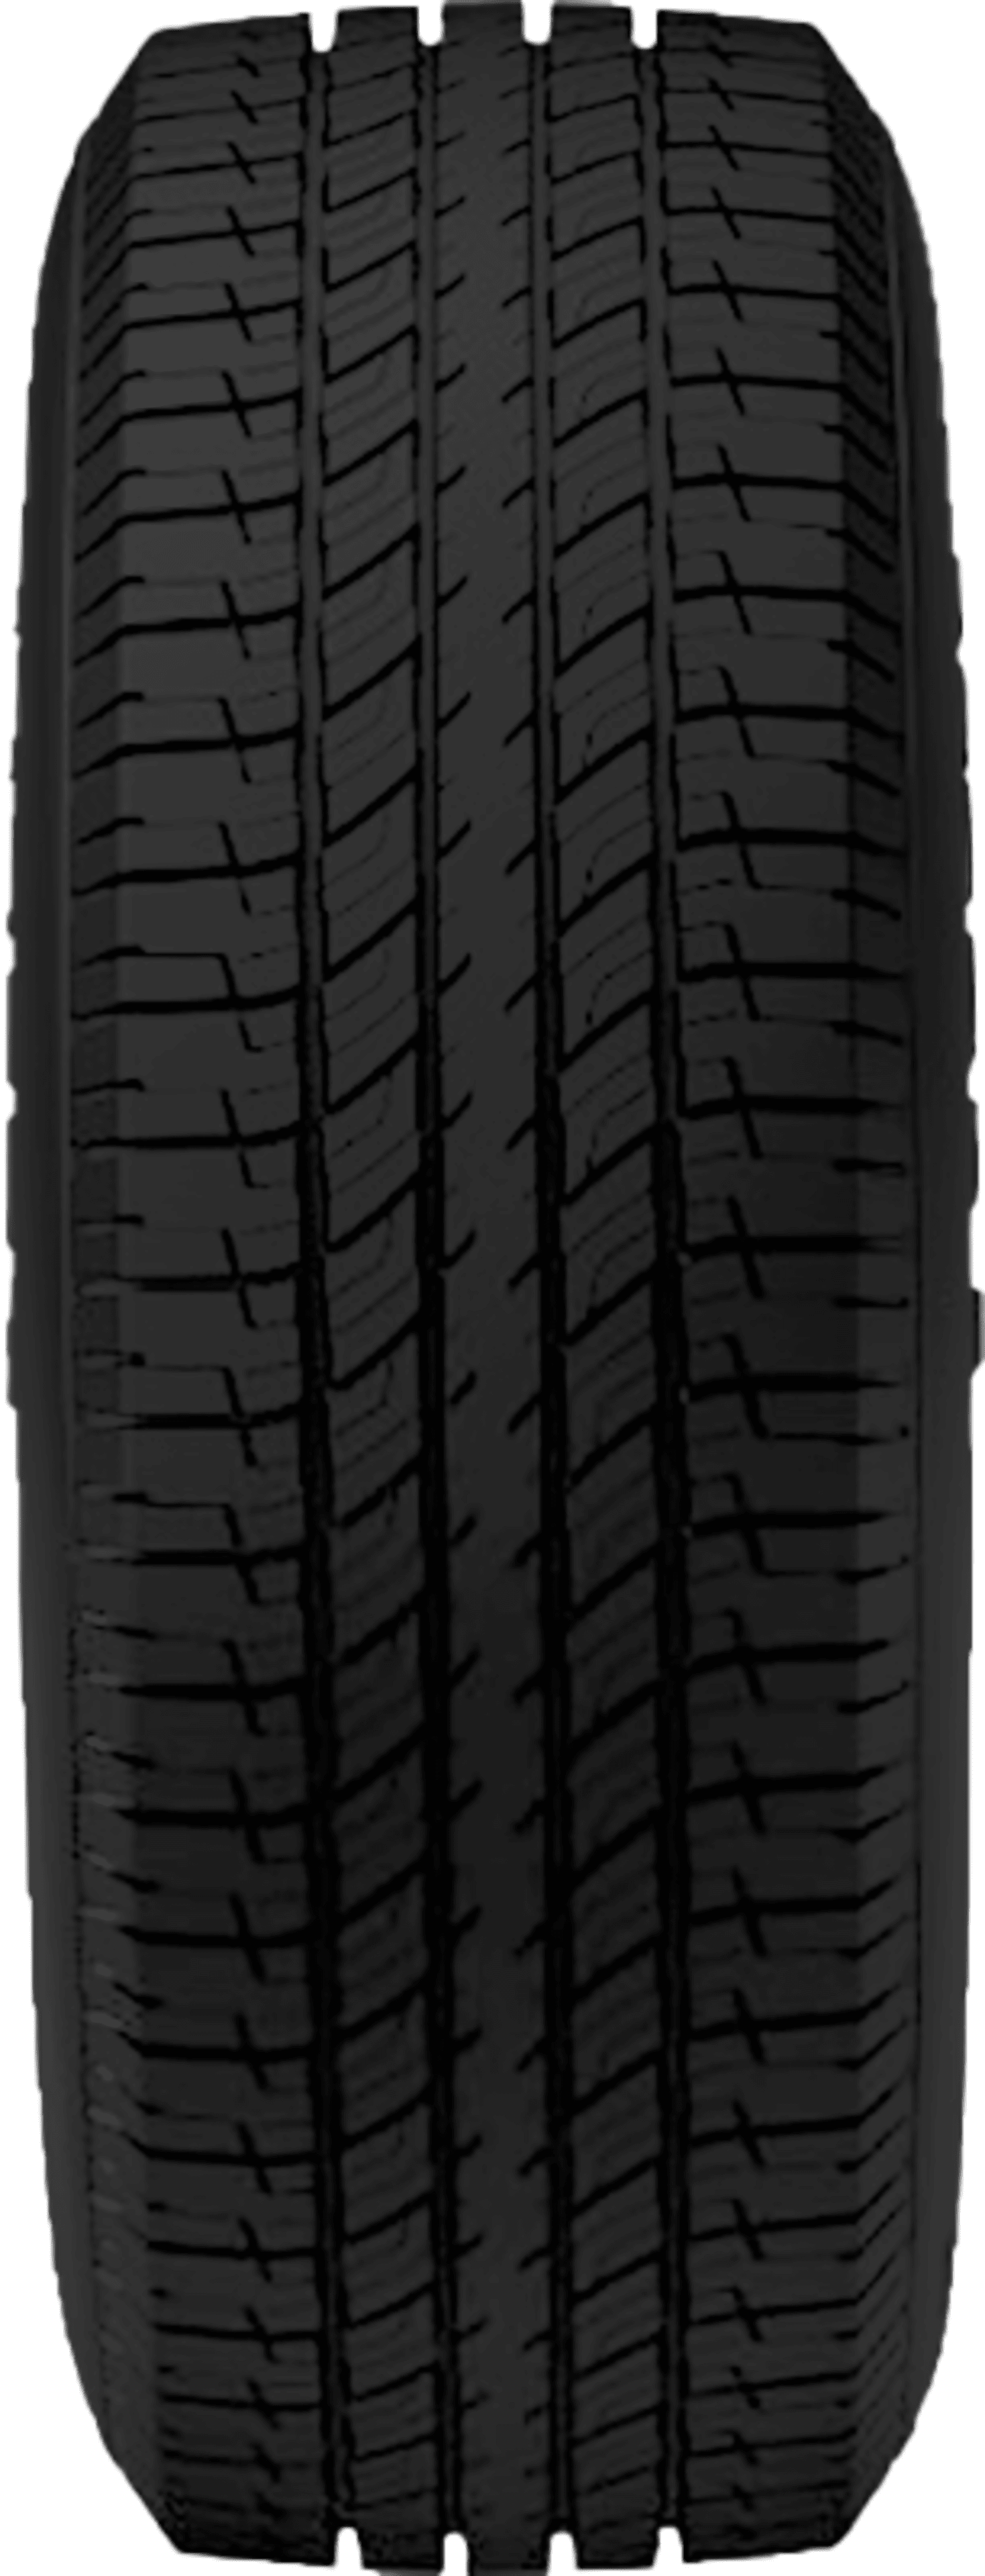 Uniroyal Laredo Cross Country Tour Tire Reviews Ratings SimpleTire